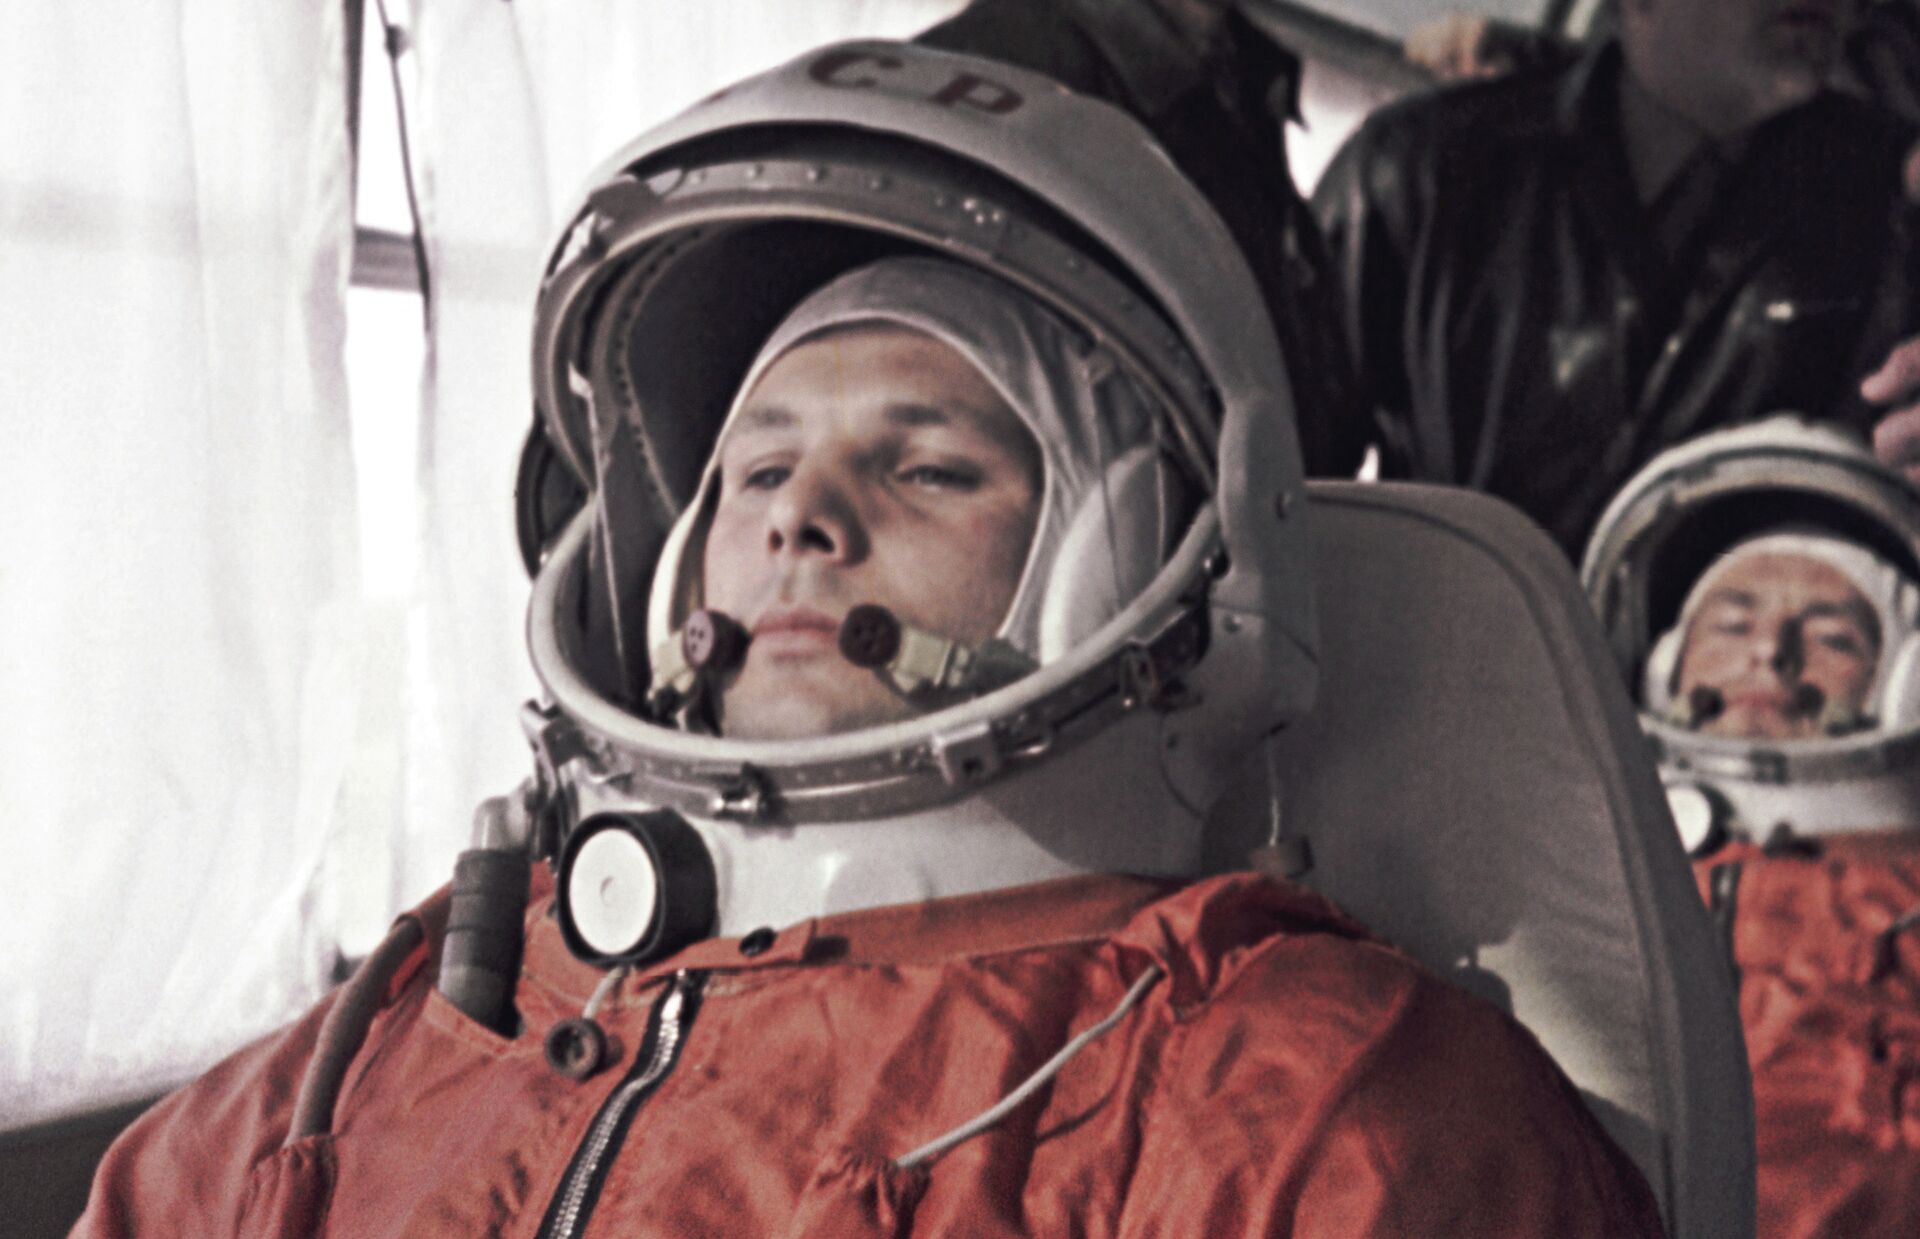 Gagarin's Flight Was 'Life Changing' for Everyone on Planet, US Space Foundation CEO Says - Sputnik International, 1920, 12.04.2021